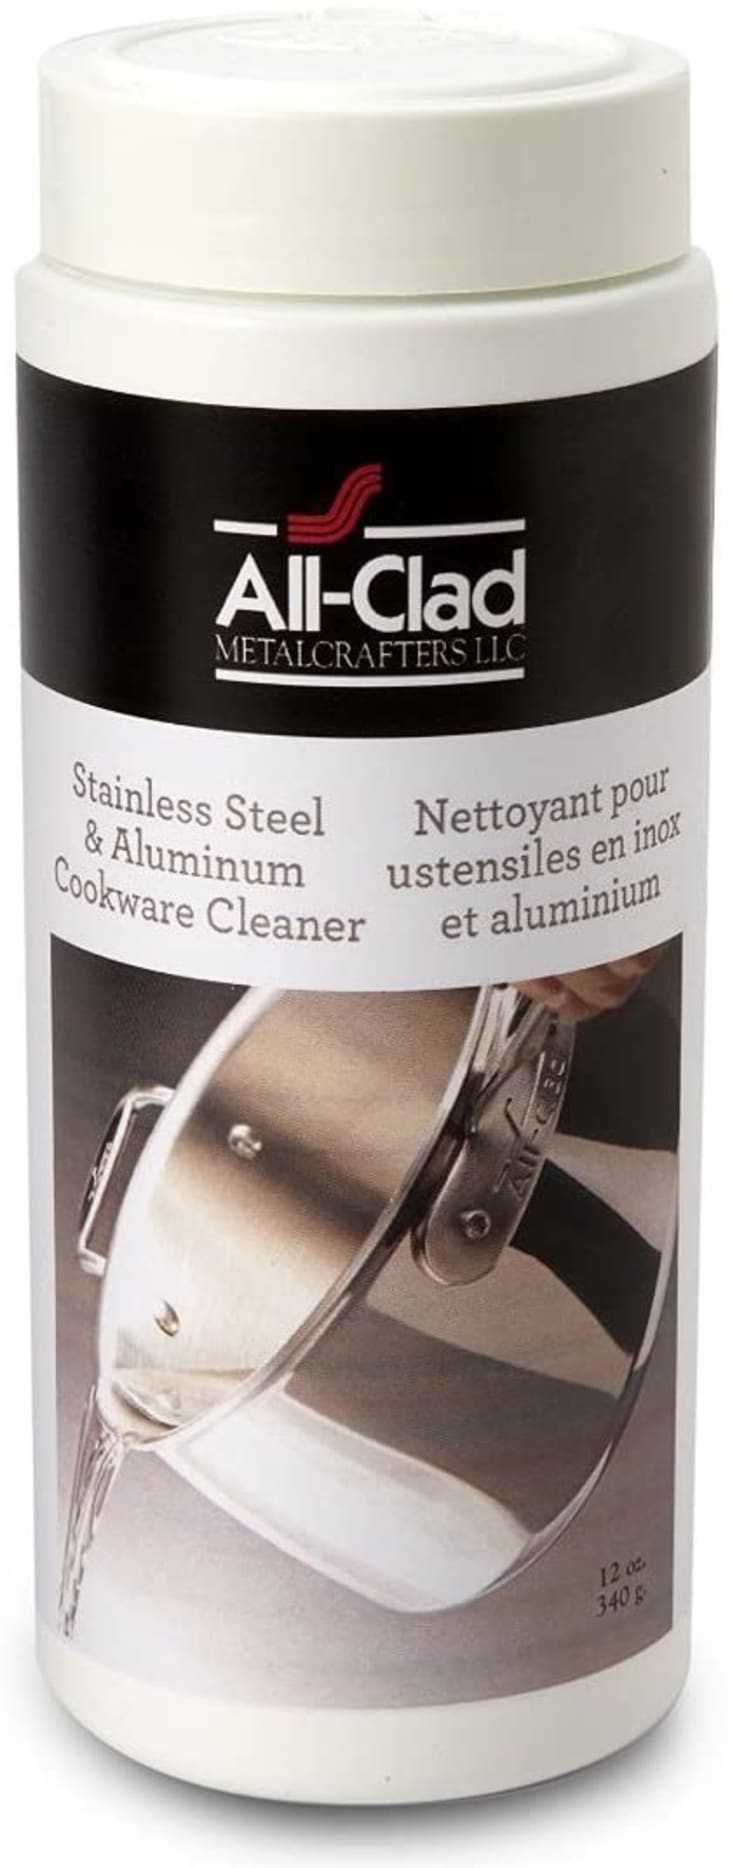 All-Clad Cookware Cleaner and Polish at Amazon